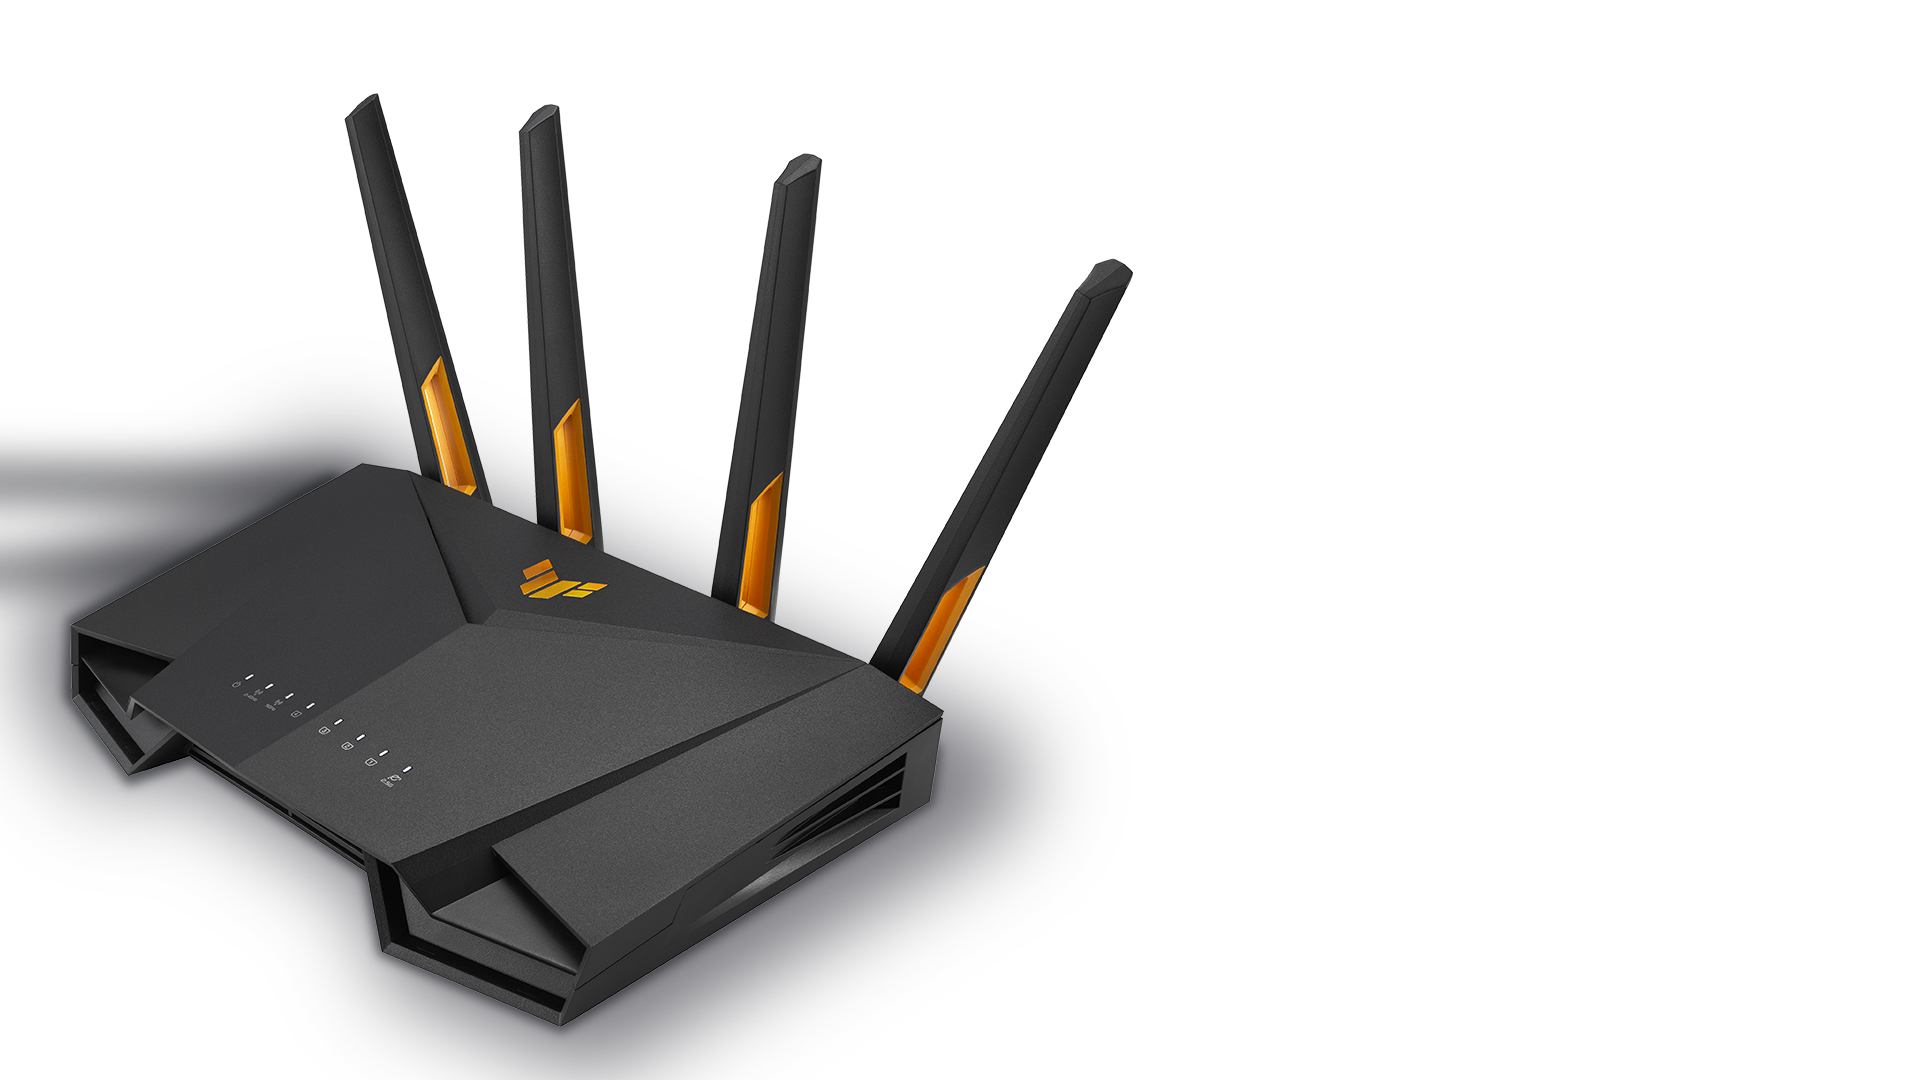 ASUS TUF Gaming AX4200 Router